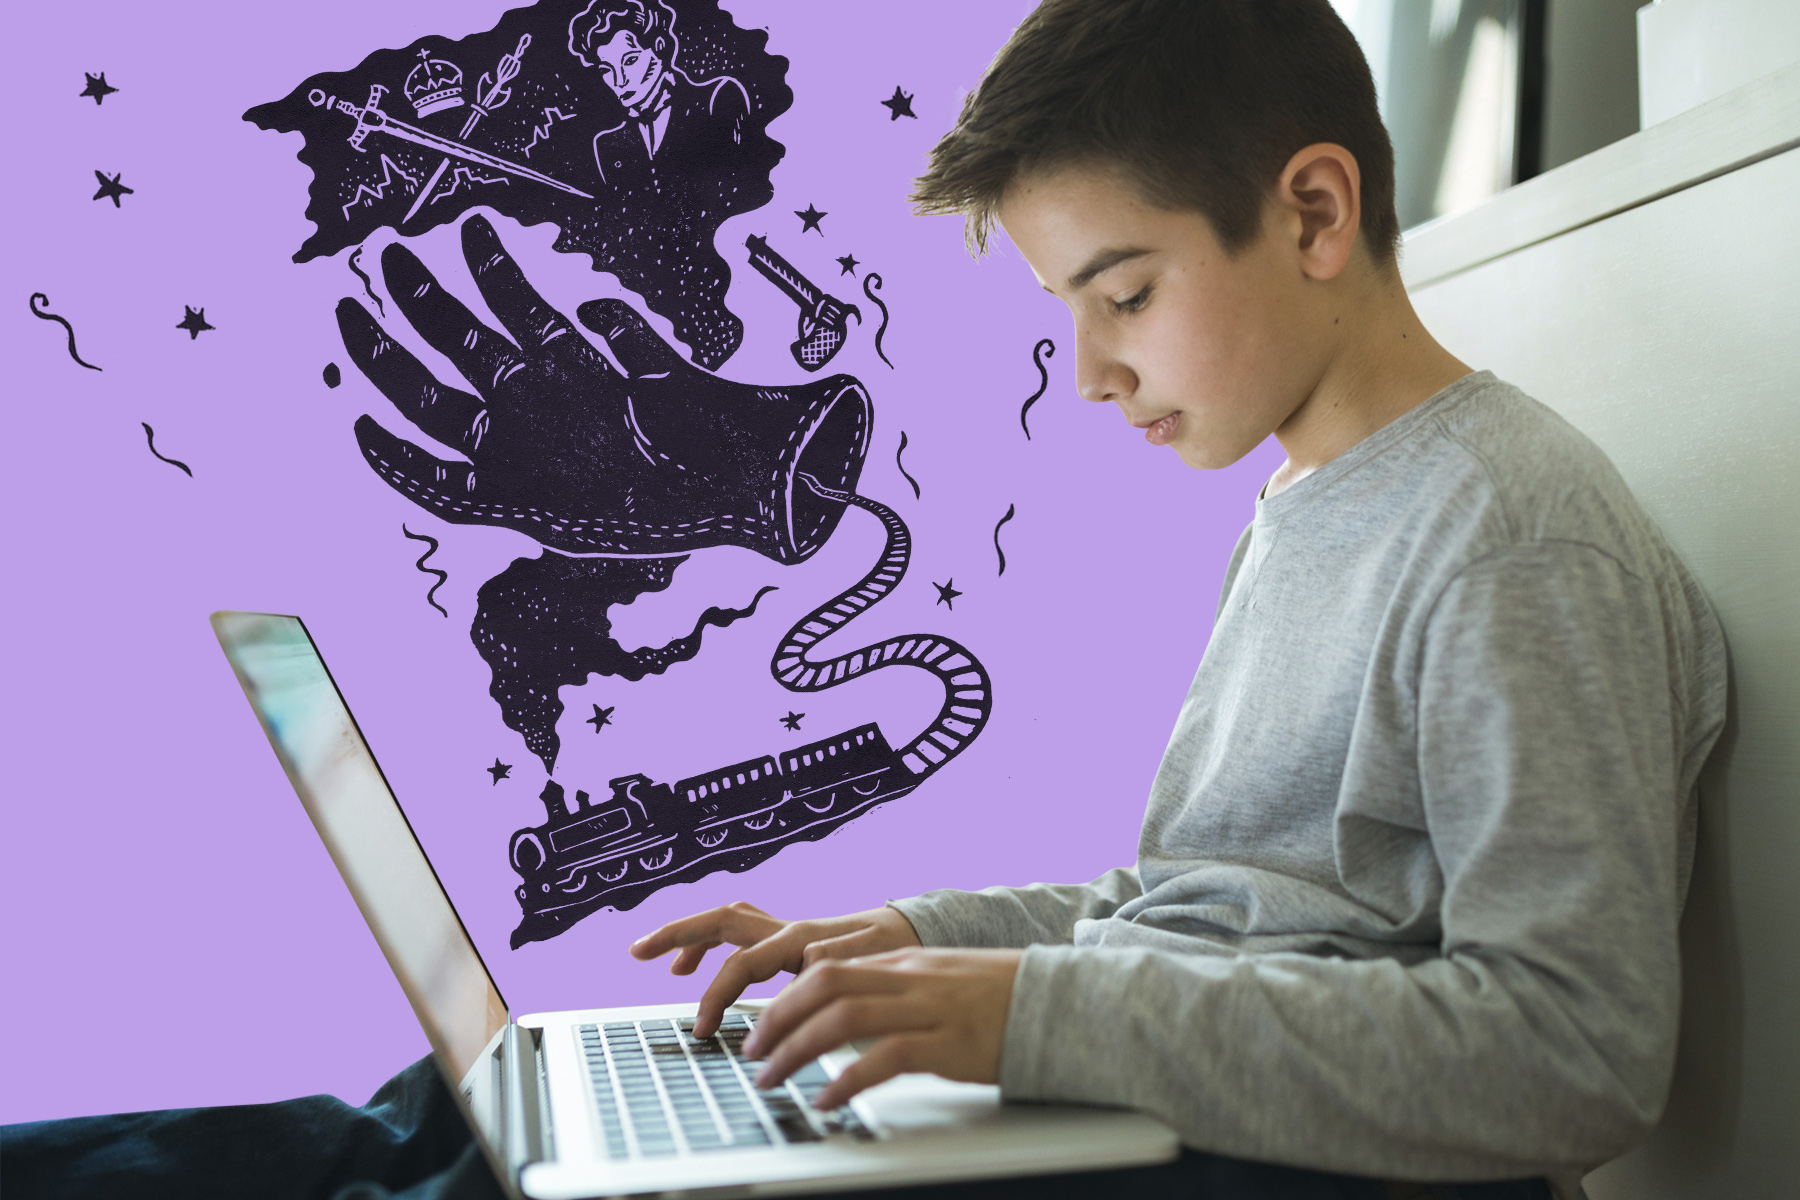 Young boy writing fan fiction on a laptop against a purple illustrated background